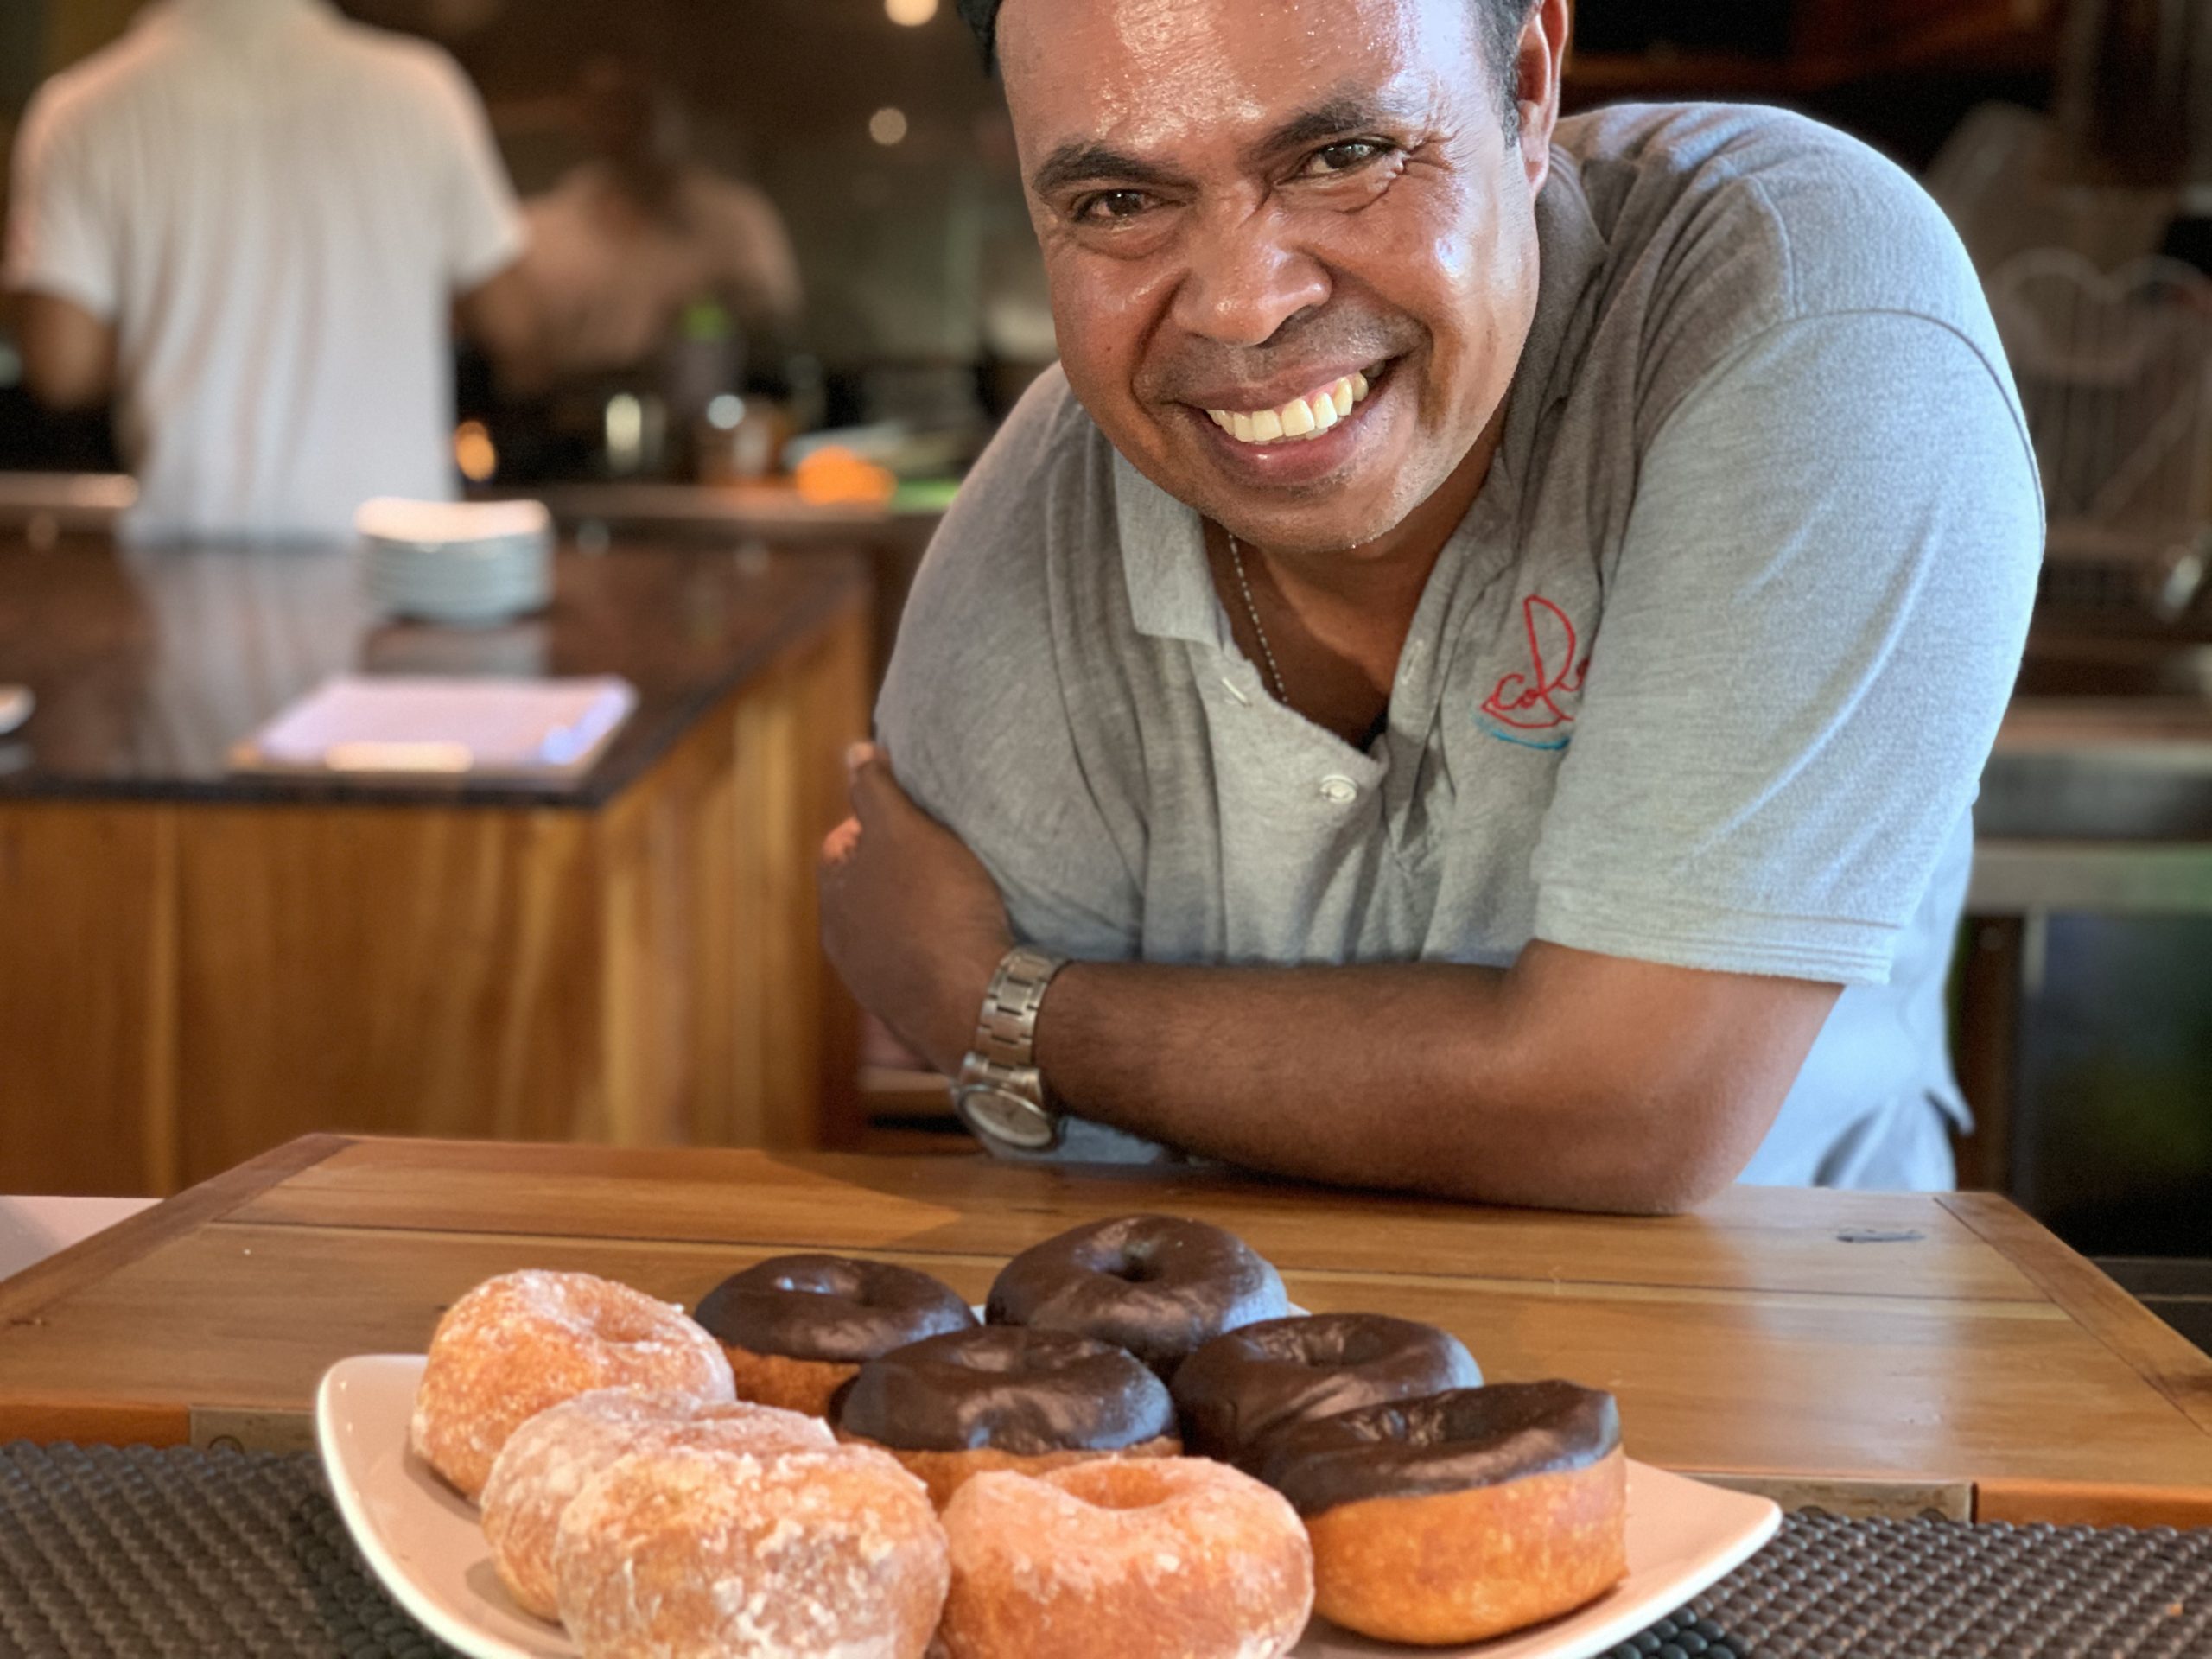 our smiling onboard chef Joe presenting his donuts, a coralia liveaboard food favorite